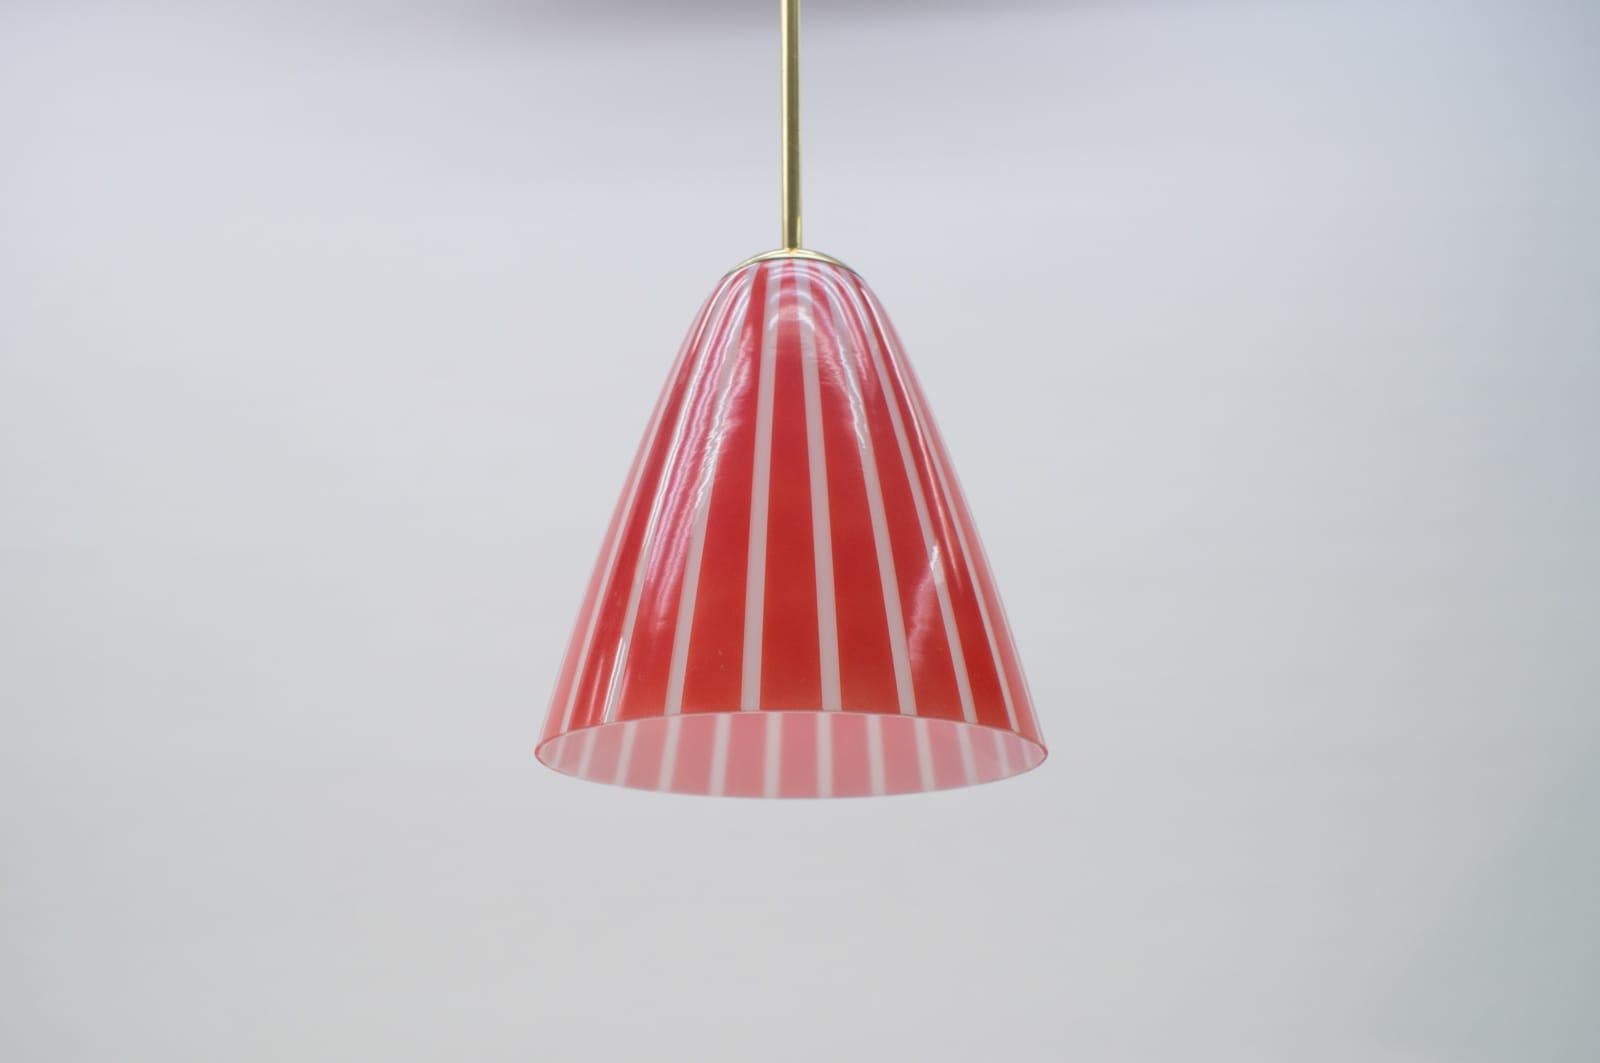 Elegant Mid-Century Modern hanging lamp made of brass and glass, 1950s, Austria.

The lamp need 1 x E27 Edison screw fit bulb. Its wired, in working condition and run both on 110 / 230 volt.